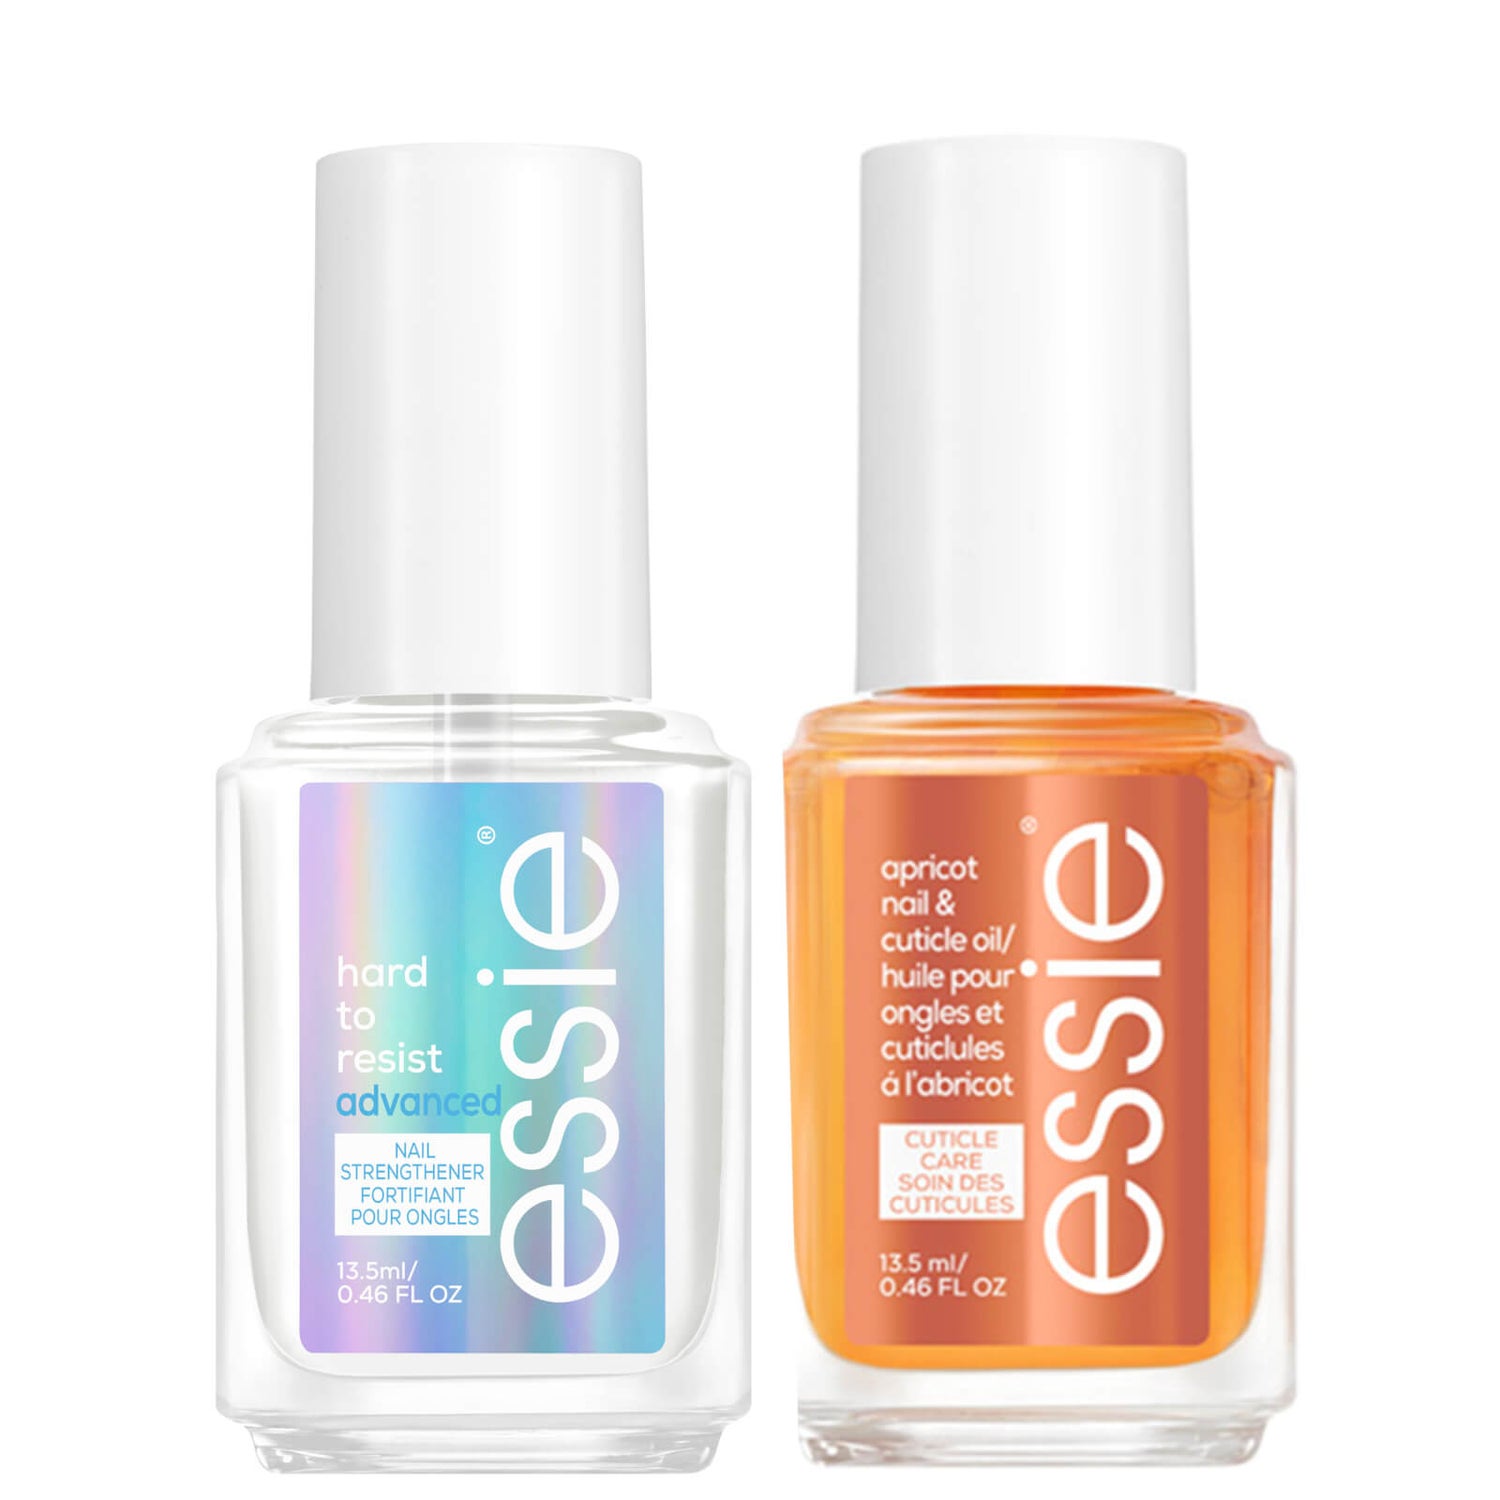 Cuticle Advanced Treatment Resist - Oil Gratis Lieferservice Apricot Nail and to Hard Care Duo weltweit essie Kit